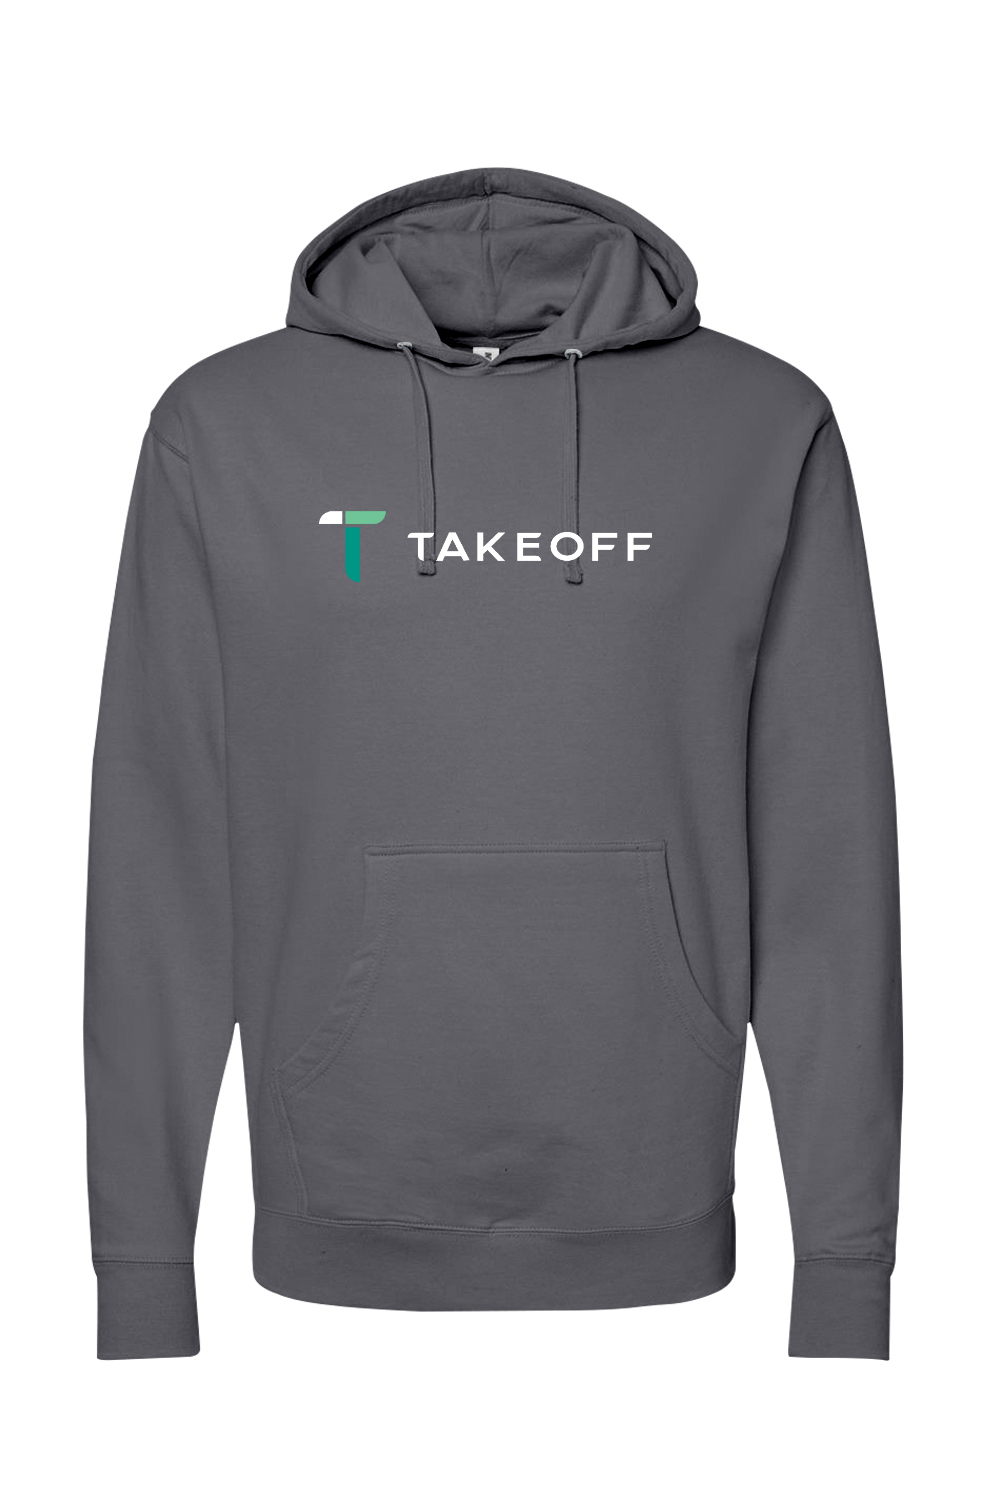 Take off - Independent Trading Co. Midweight Hooded Sweatshirt